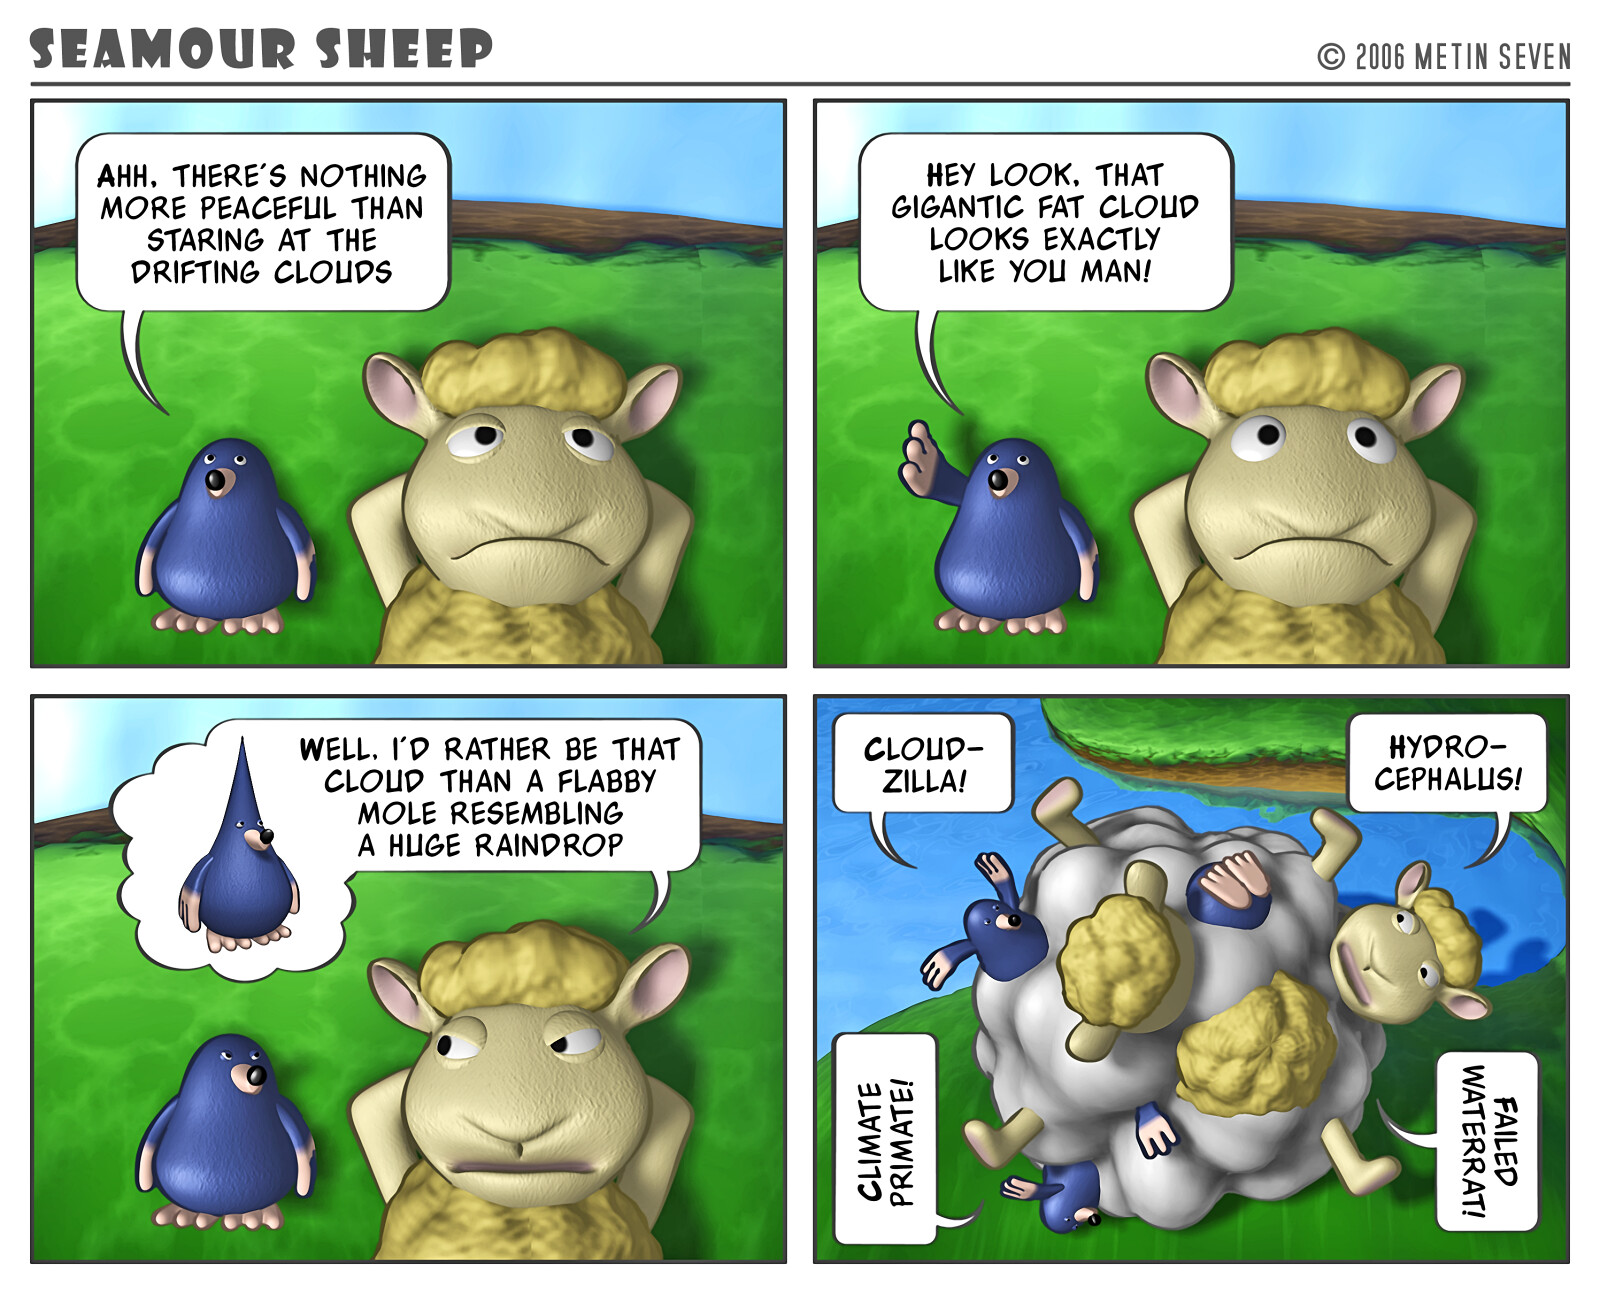 Seamour Sheep and Marty Mole comic strip episode: Clouds